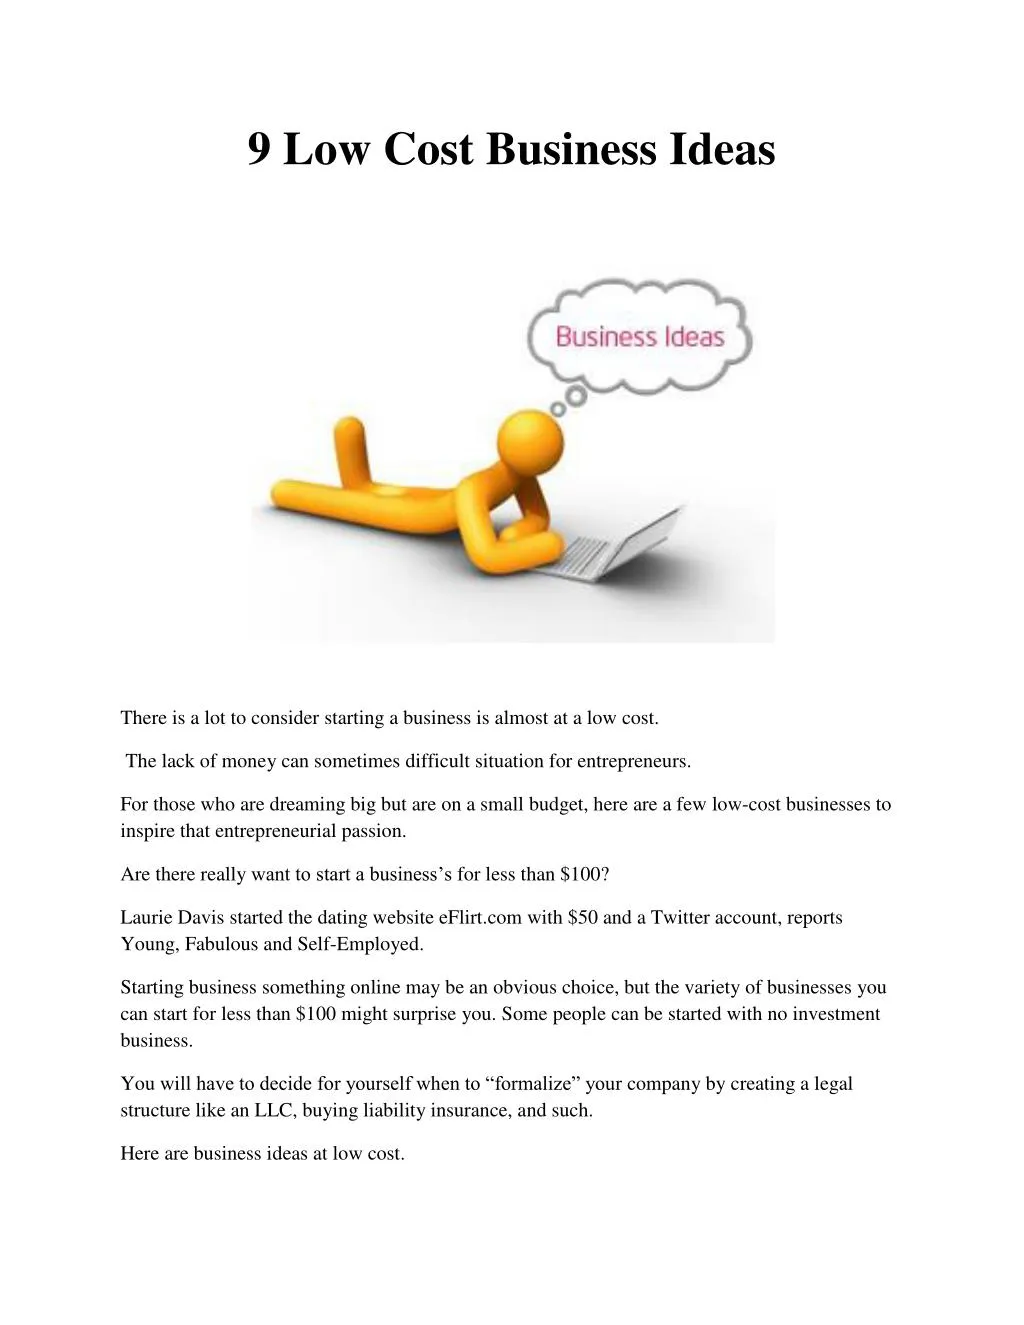 9 low cost business ideas